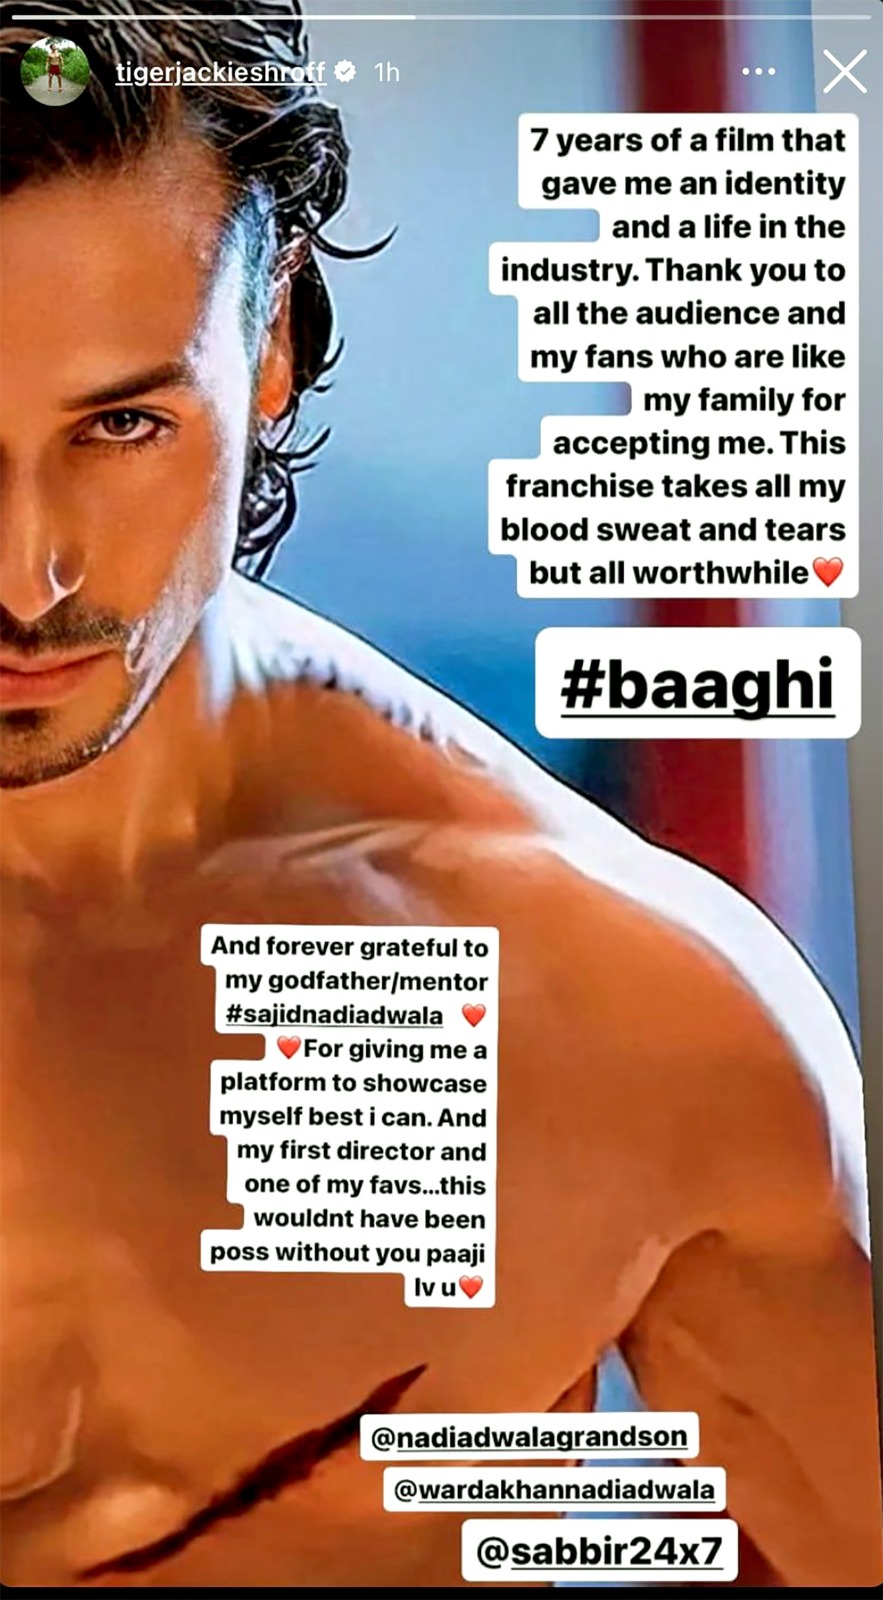 Tiger Shroff expresses his gratitude as Baaghi clocks 7 years; says, “7 years of a film that gave me an identity and a life in the Industry”